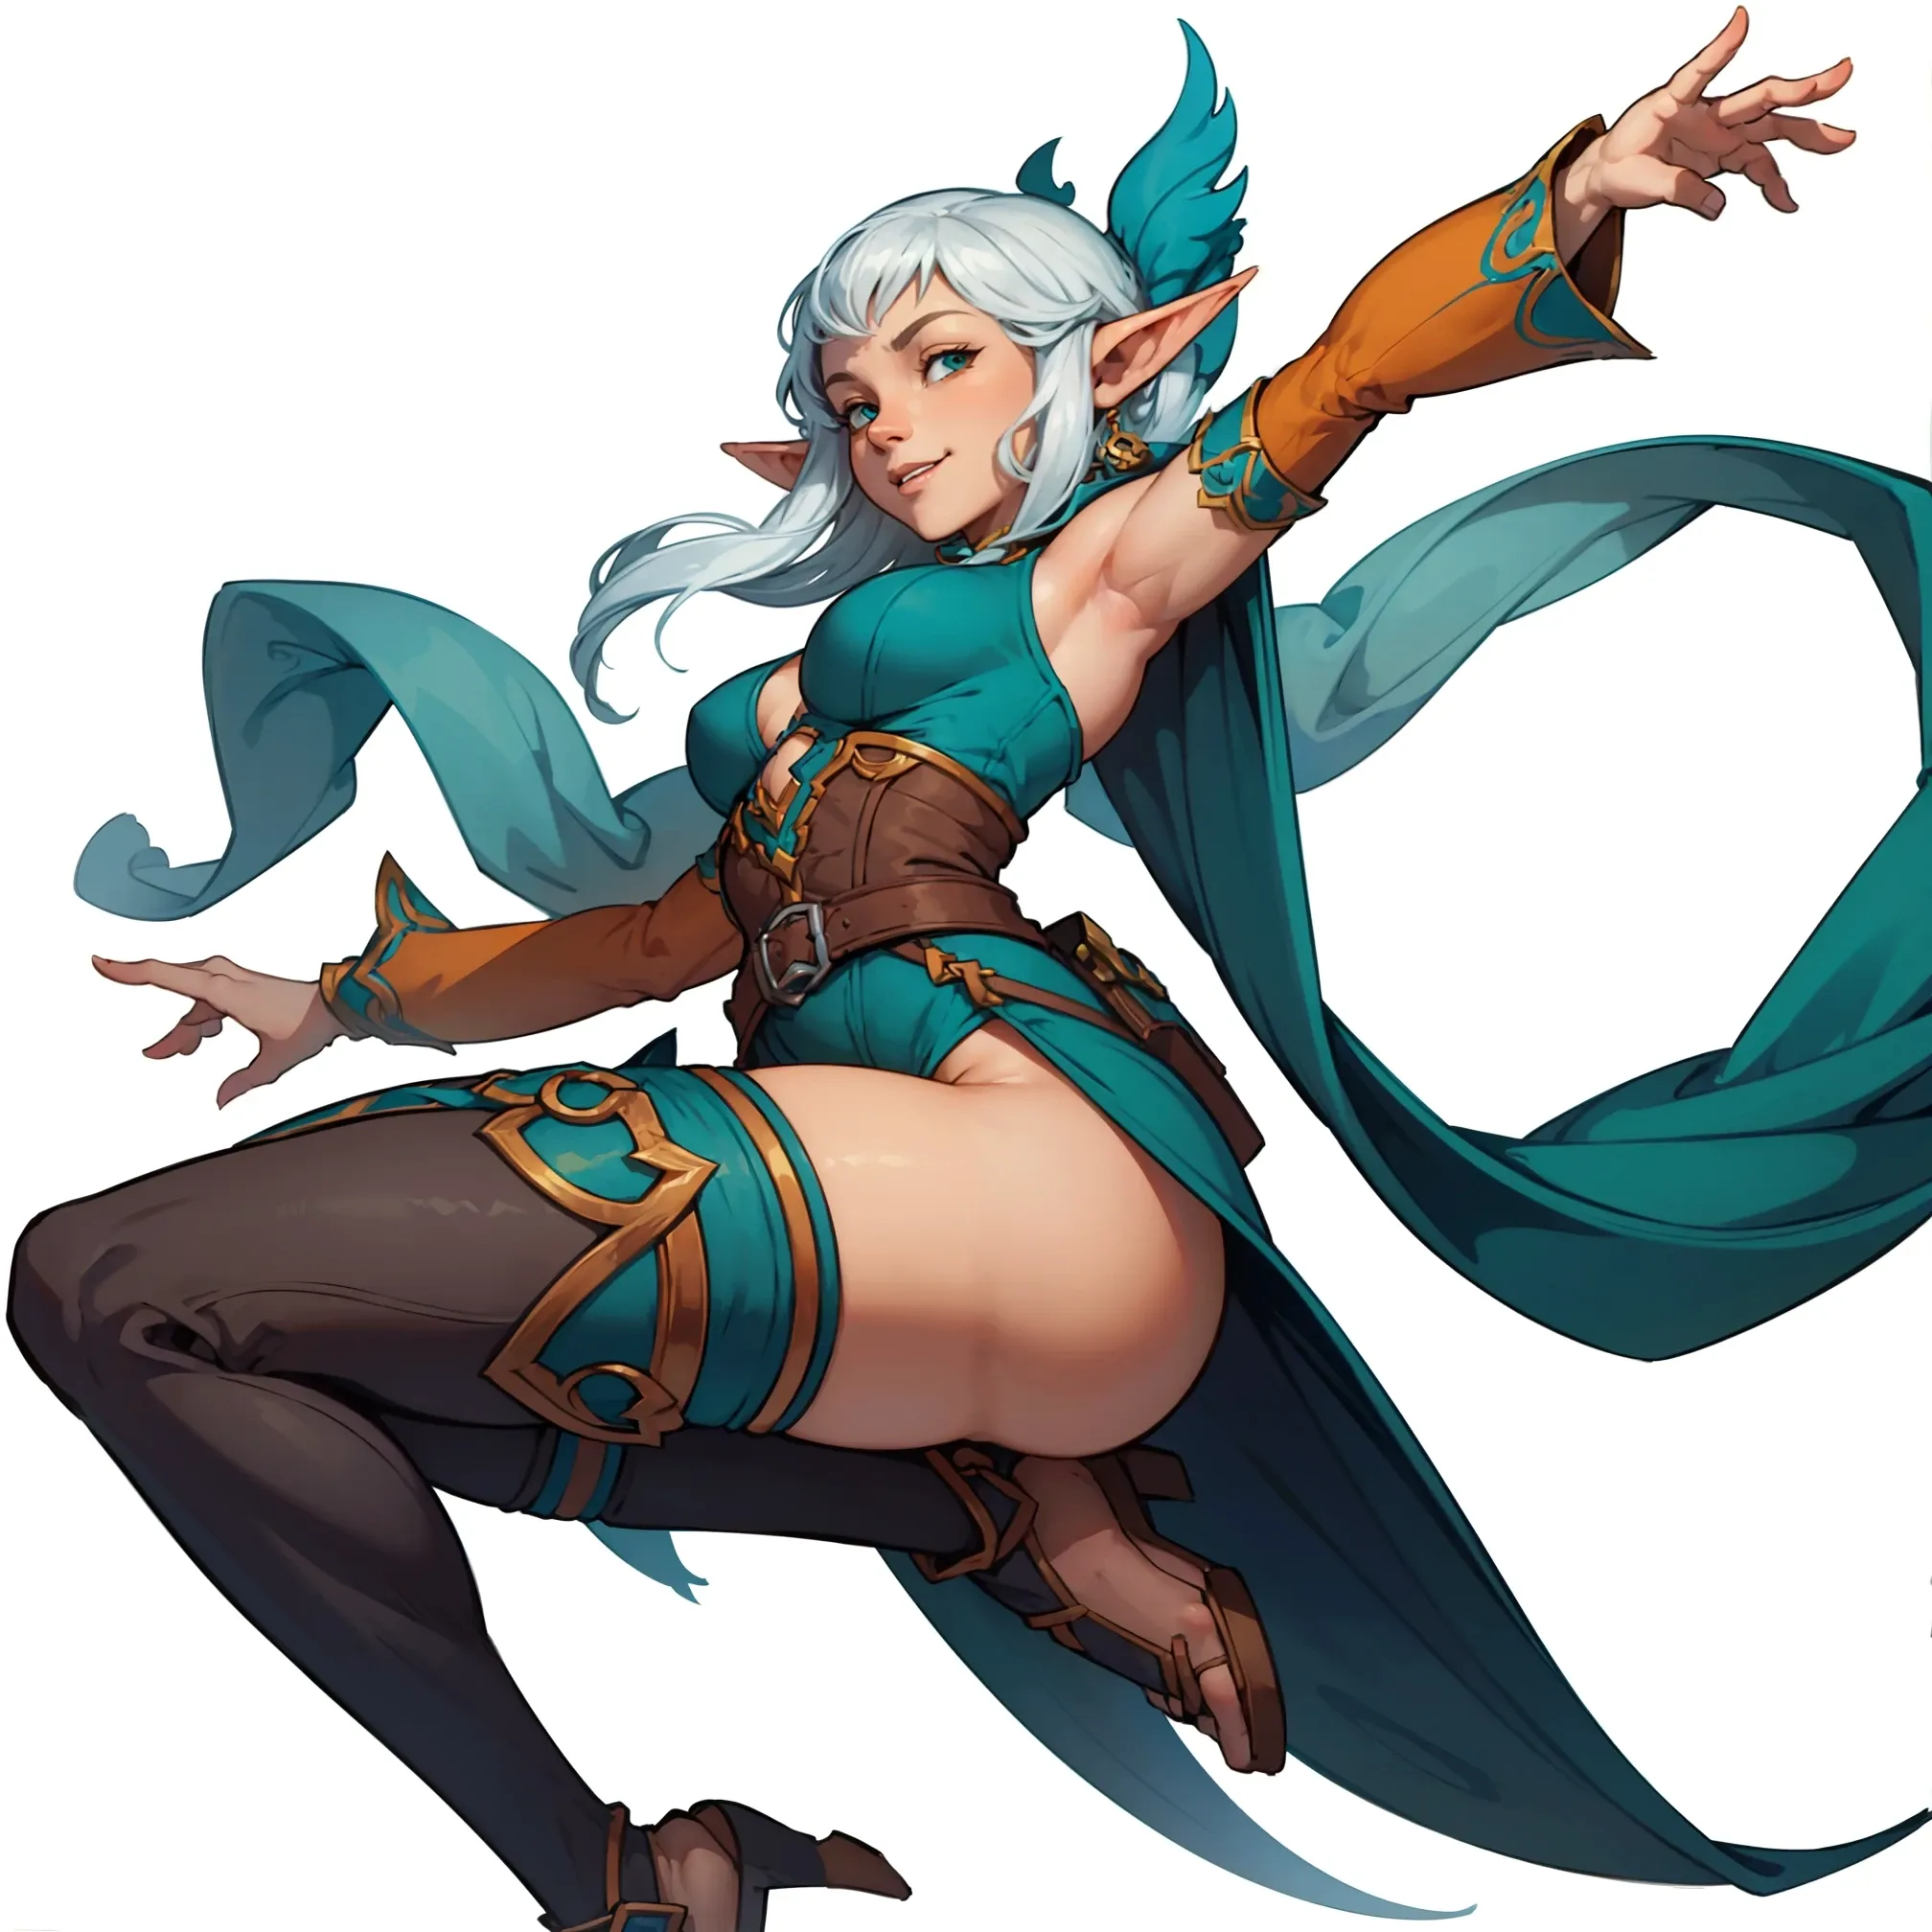 Joyful cartoon fantasy elf girl jumping with a floating scarf in green and cyan colors